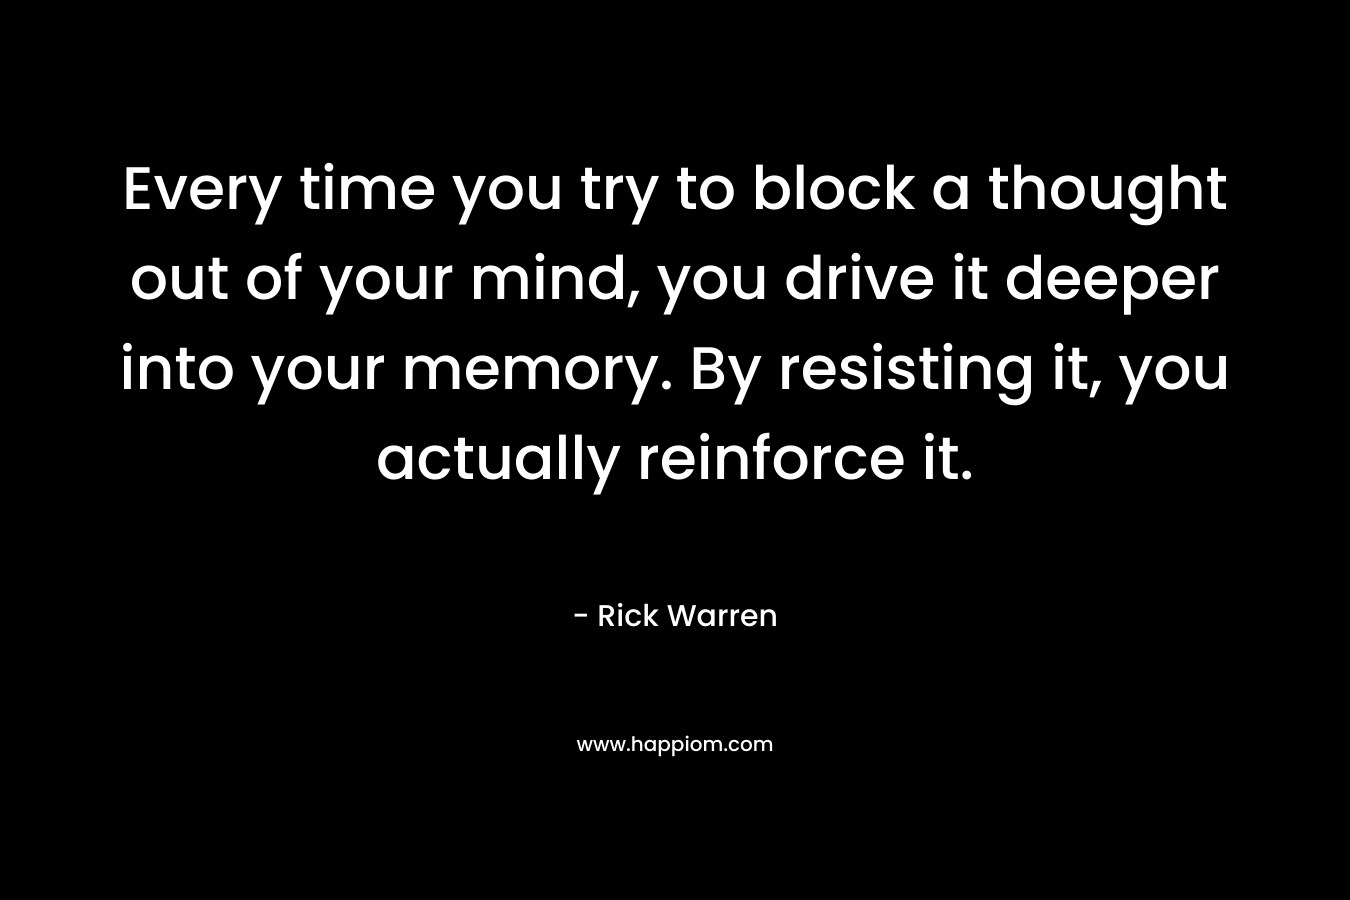 Every time you try to block a thought out of your mind, you drive it deeper into your memory. By resisting it, you actually reinforce it. – Rick Warren